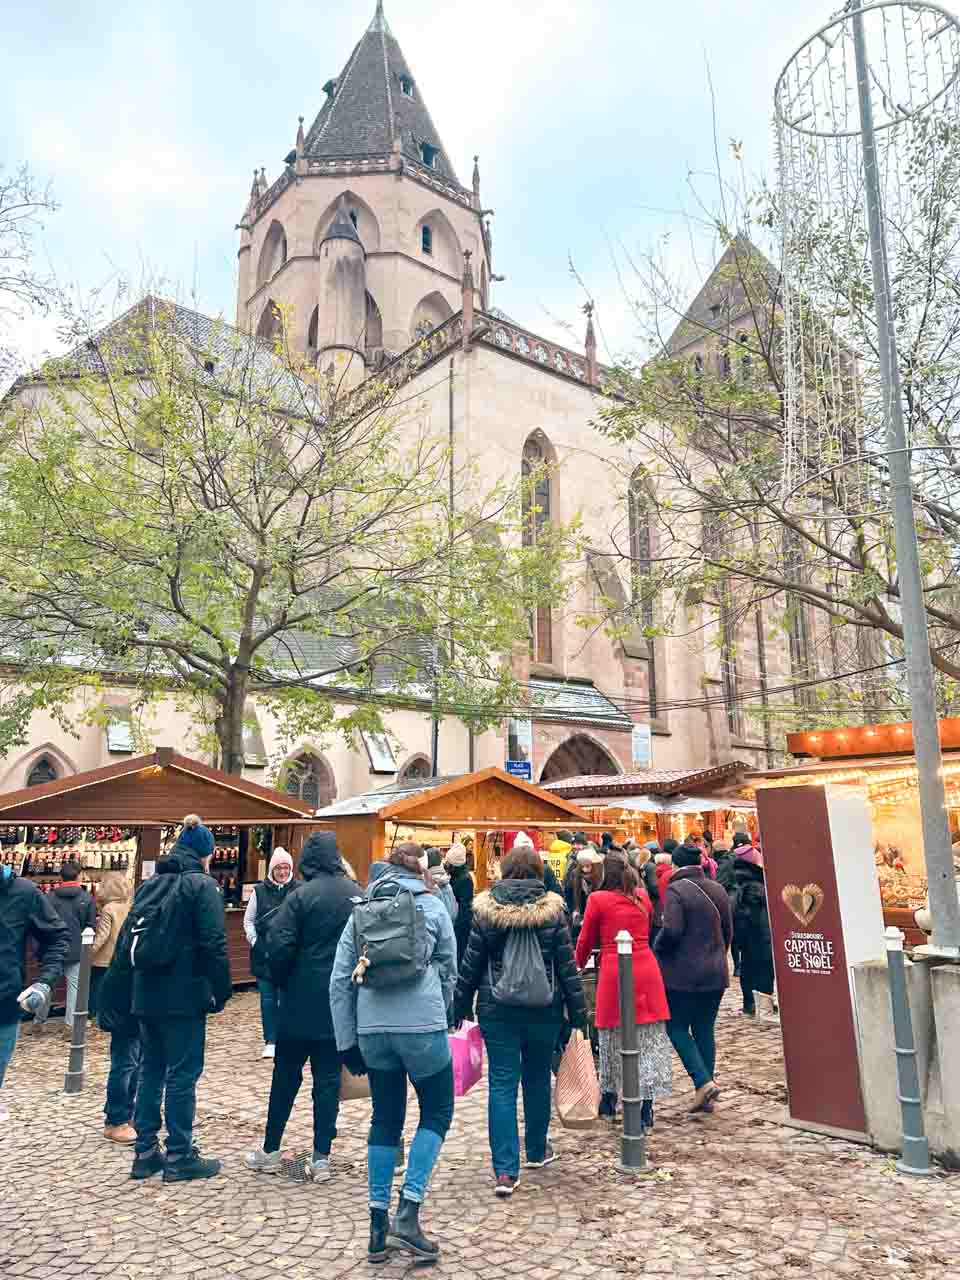 Shoppers walking past traditional market stalls near St. Thomas Church in Strasbourg